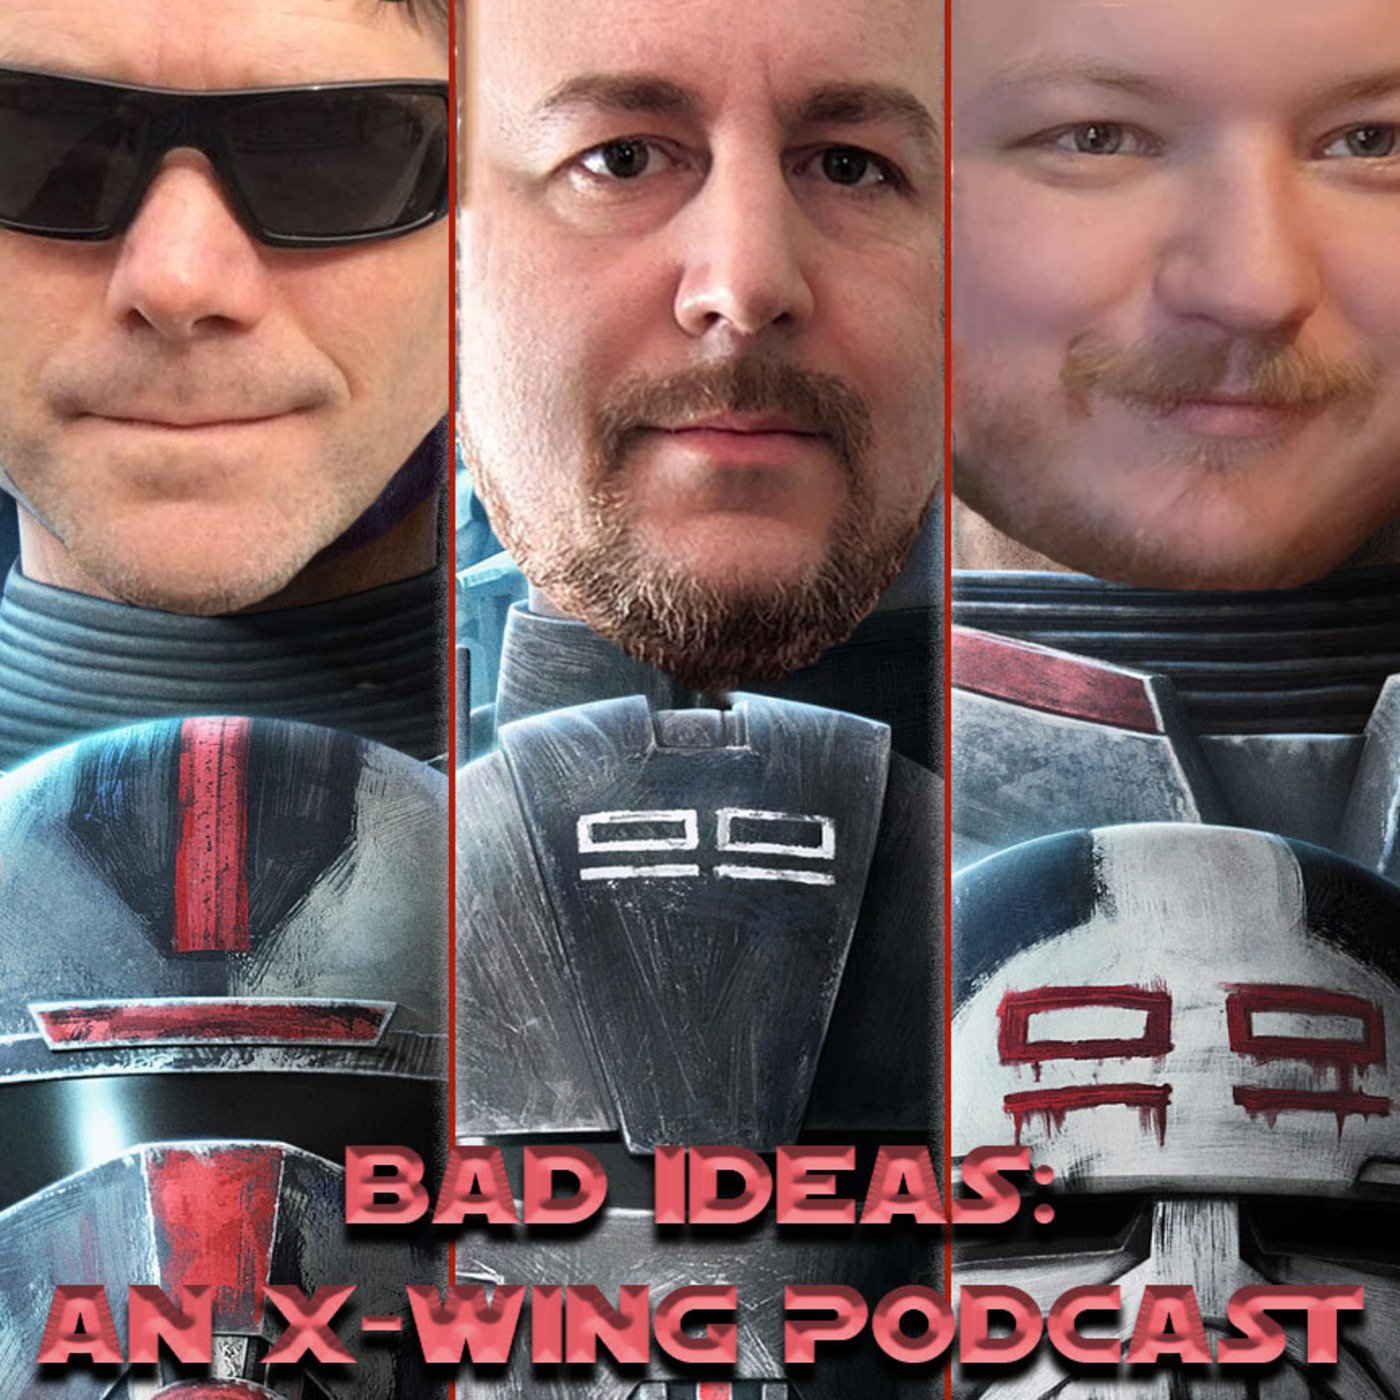 BAD IDEAS - X-Wing Podcast #2